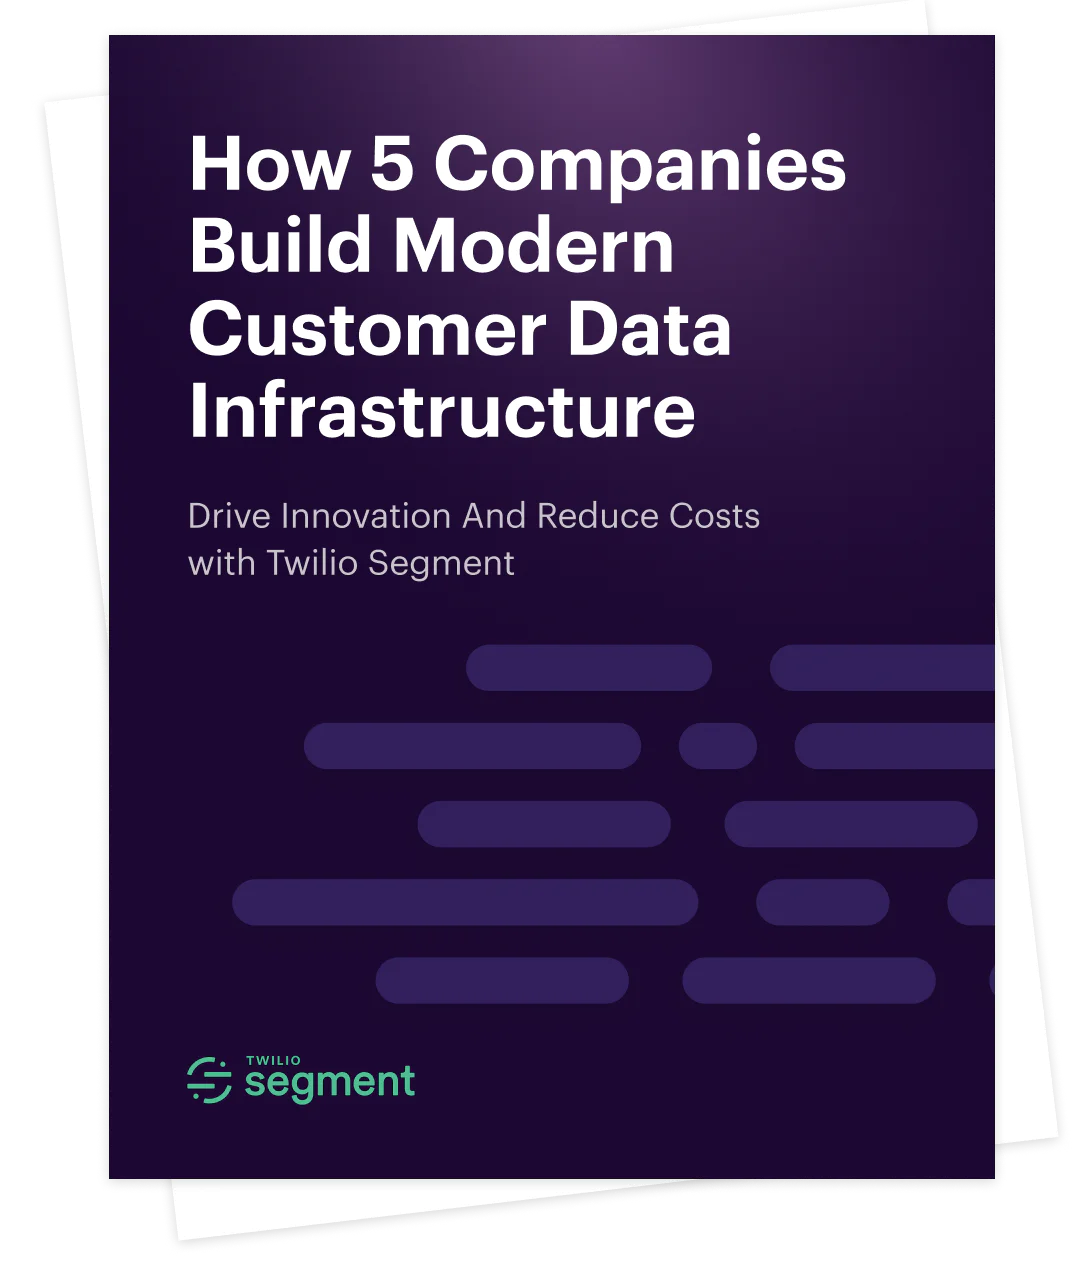 How 5 innovative companies build modern data infrastructure  How Segment enables companies to customize their data infrastructure  How to empower developers, drive innovation, and save thousands of engineering hours with Segment